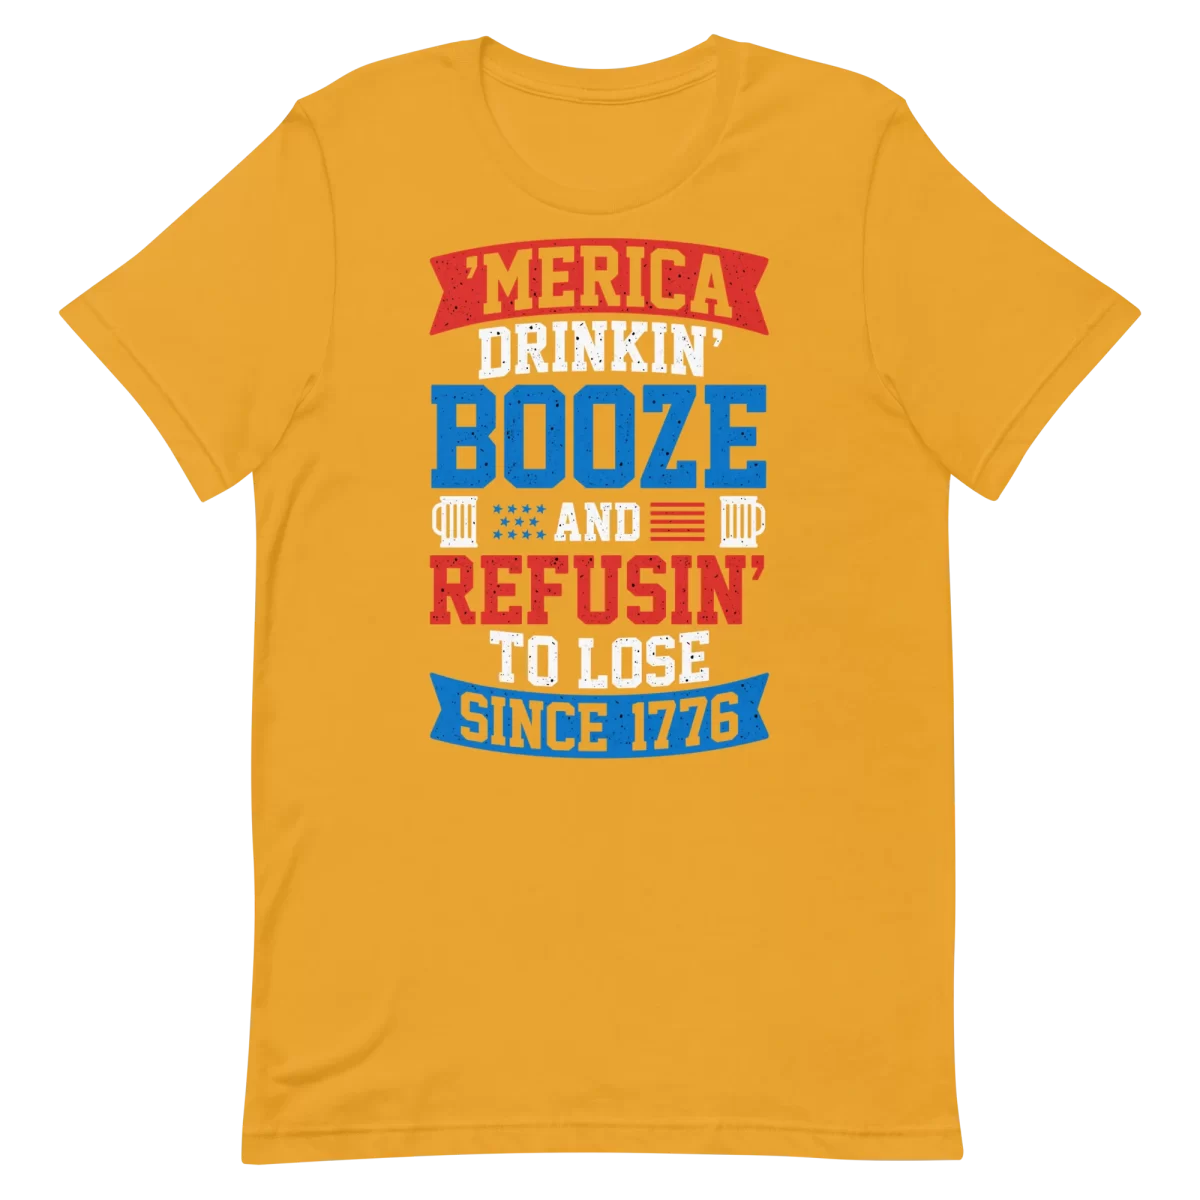 Unisex T-Shirt - Drinkin Booze And Refuse to Lose - Mustard